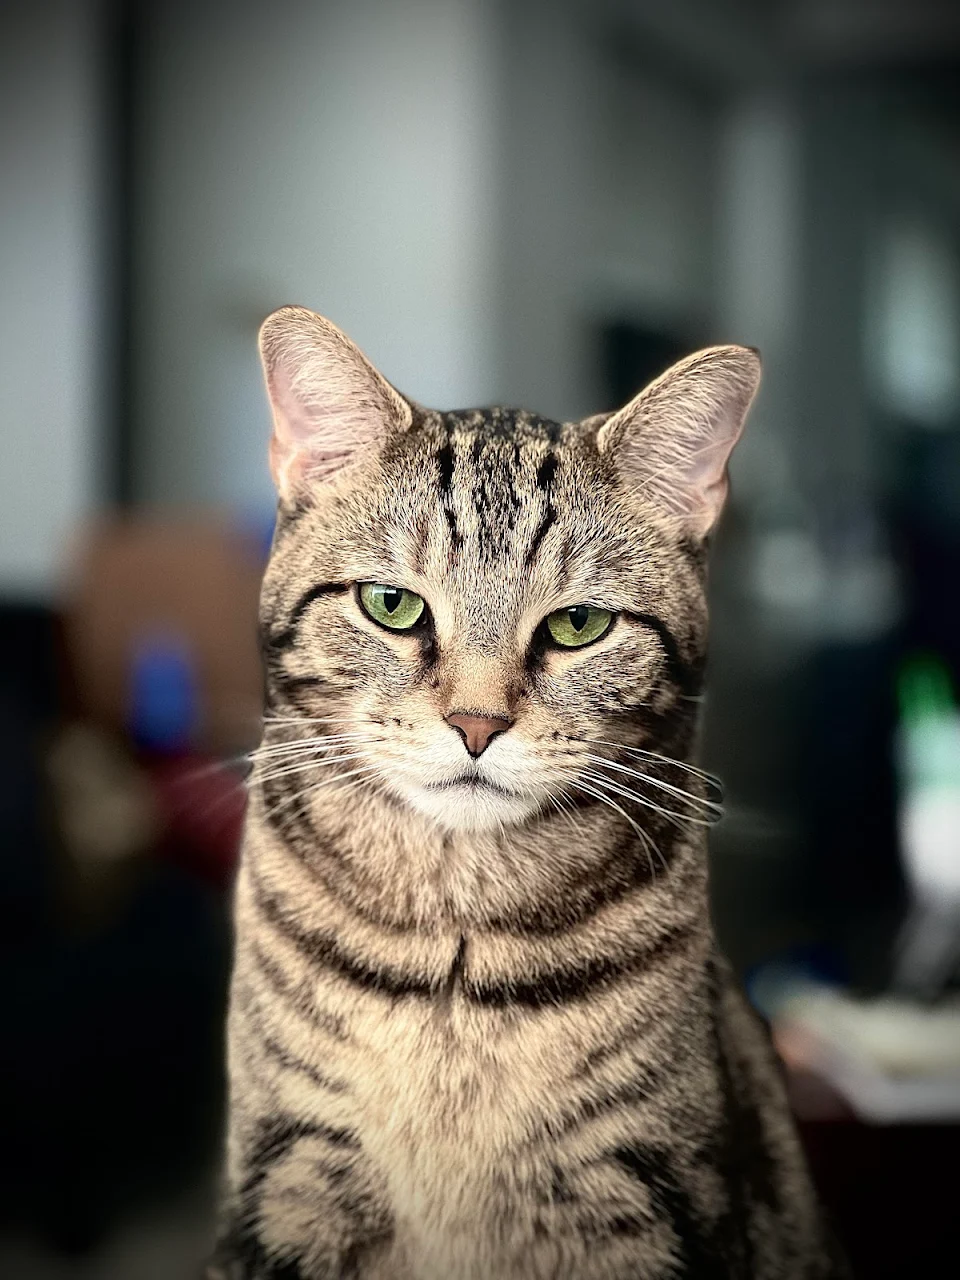 Staying with a friend this weekend took a picture of his cat. Shot with an iPhone 13 Pro Max.